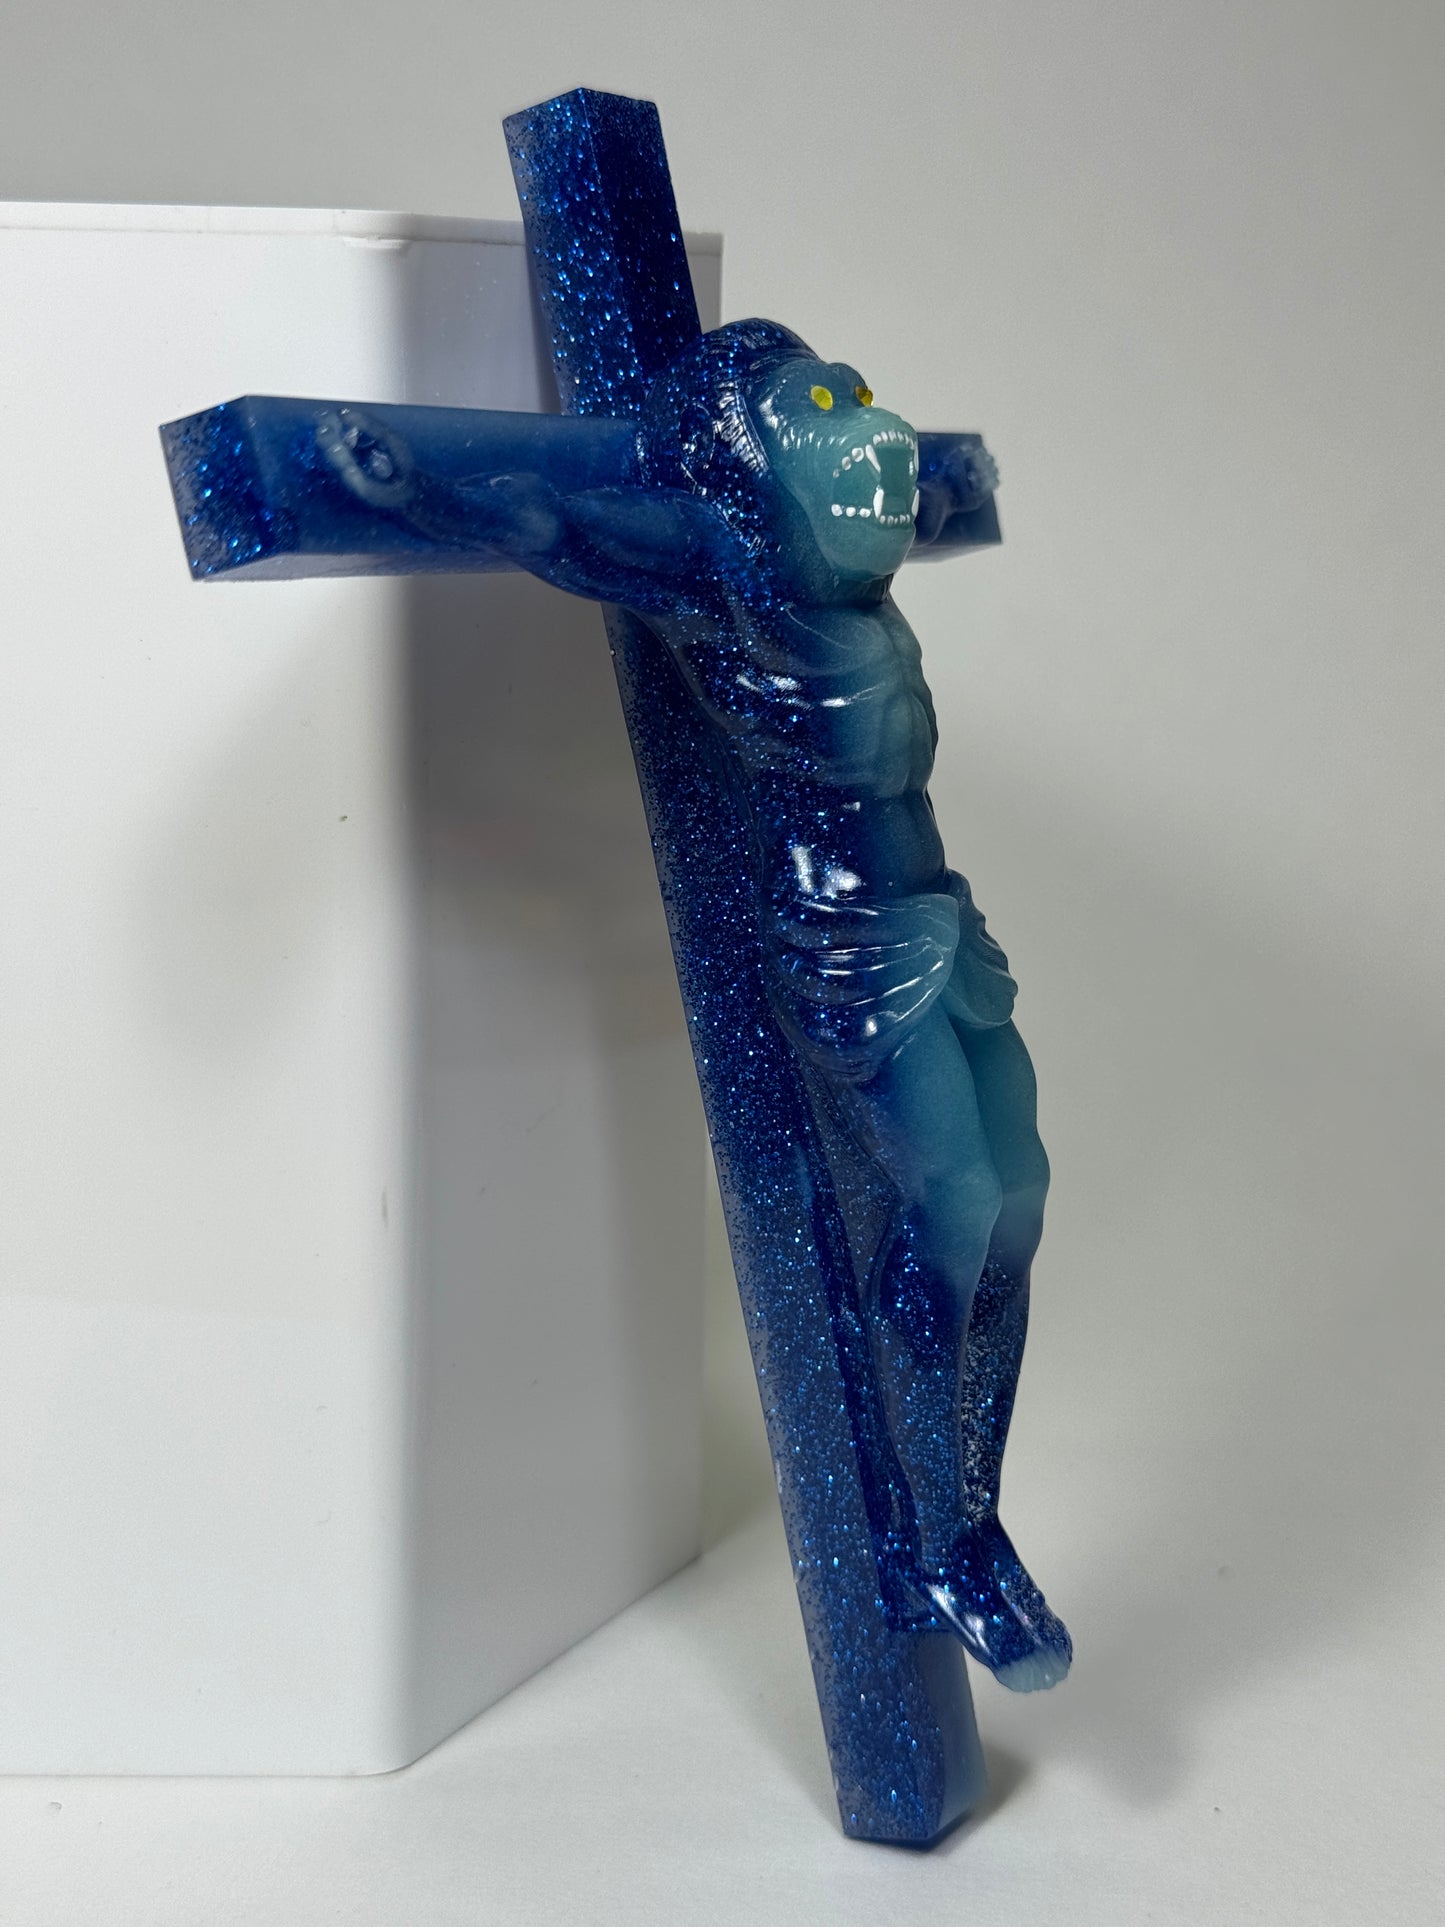 Christ on the Cross but he is an Ape, Magical Toy: Feeling Blue, How R U?